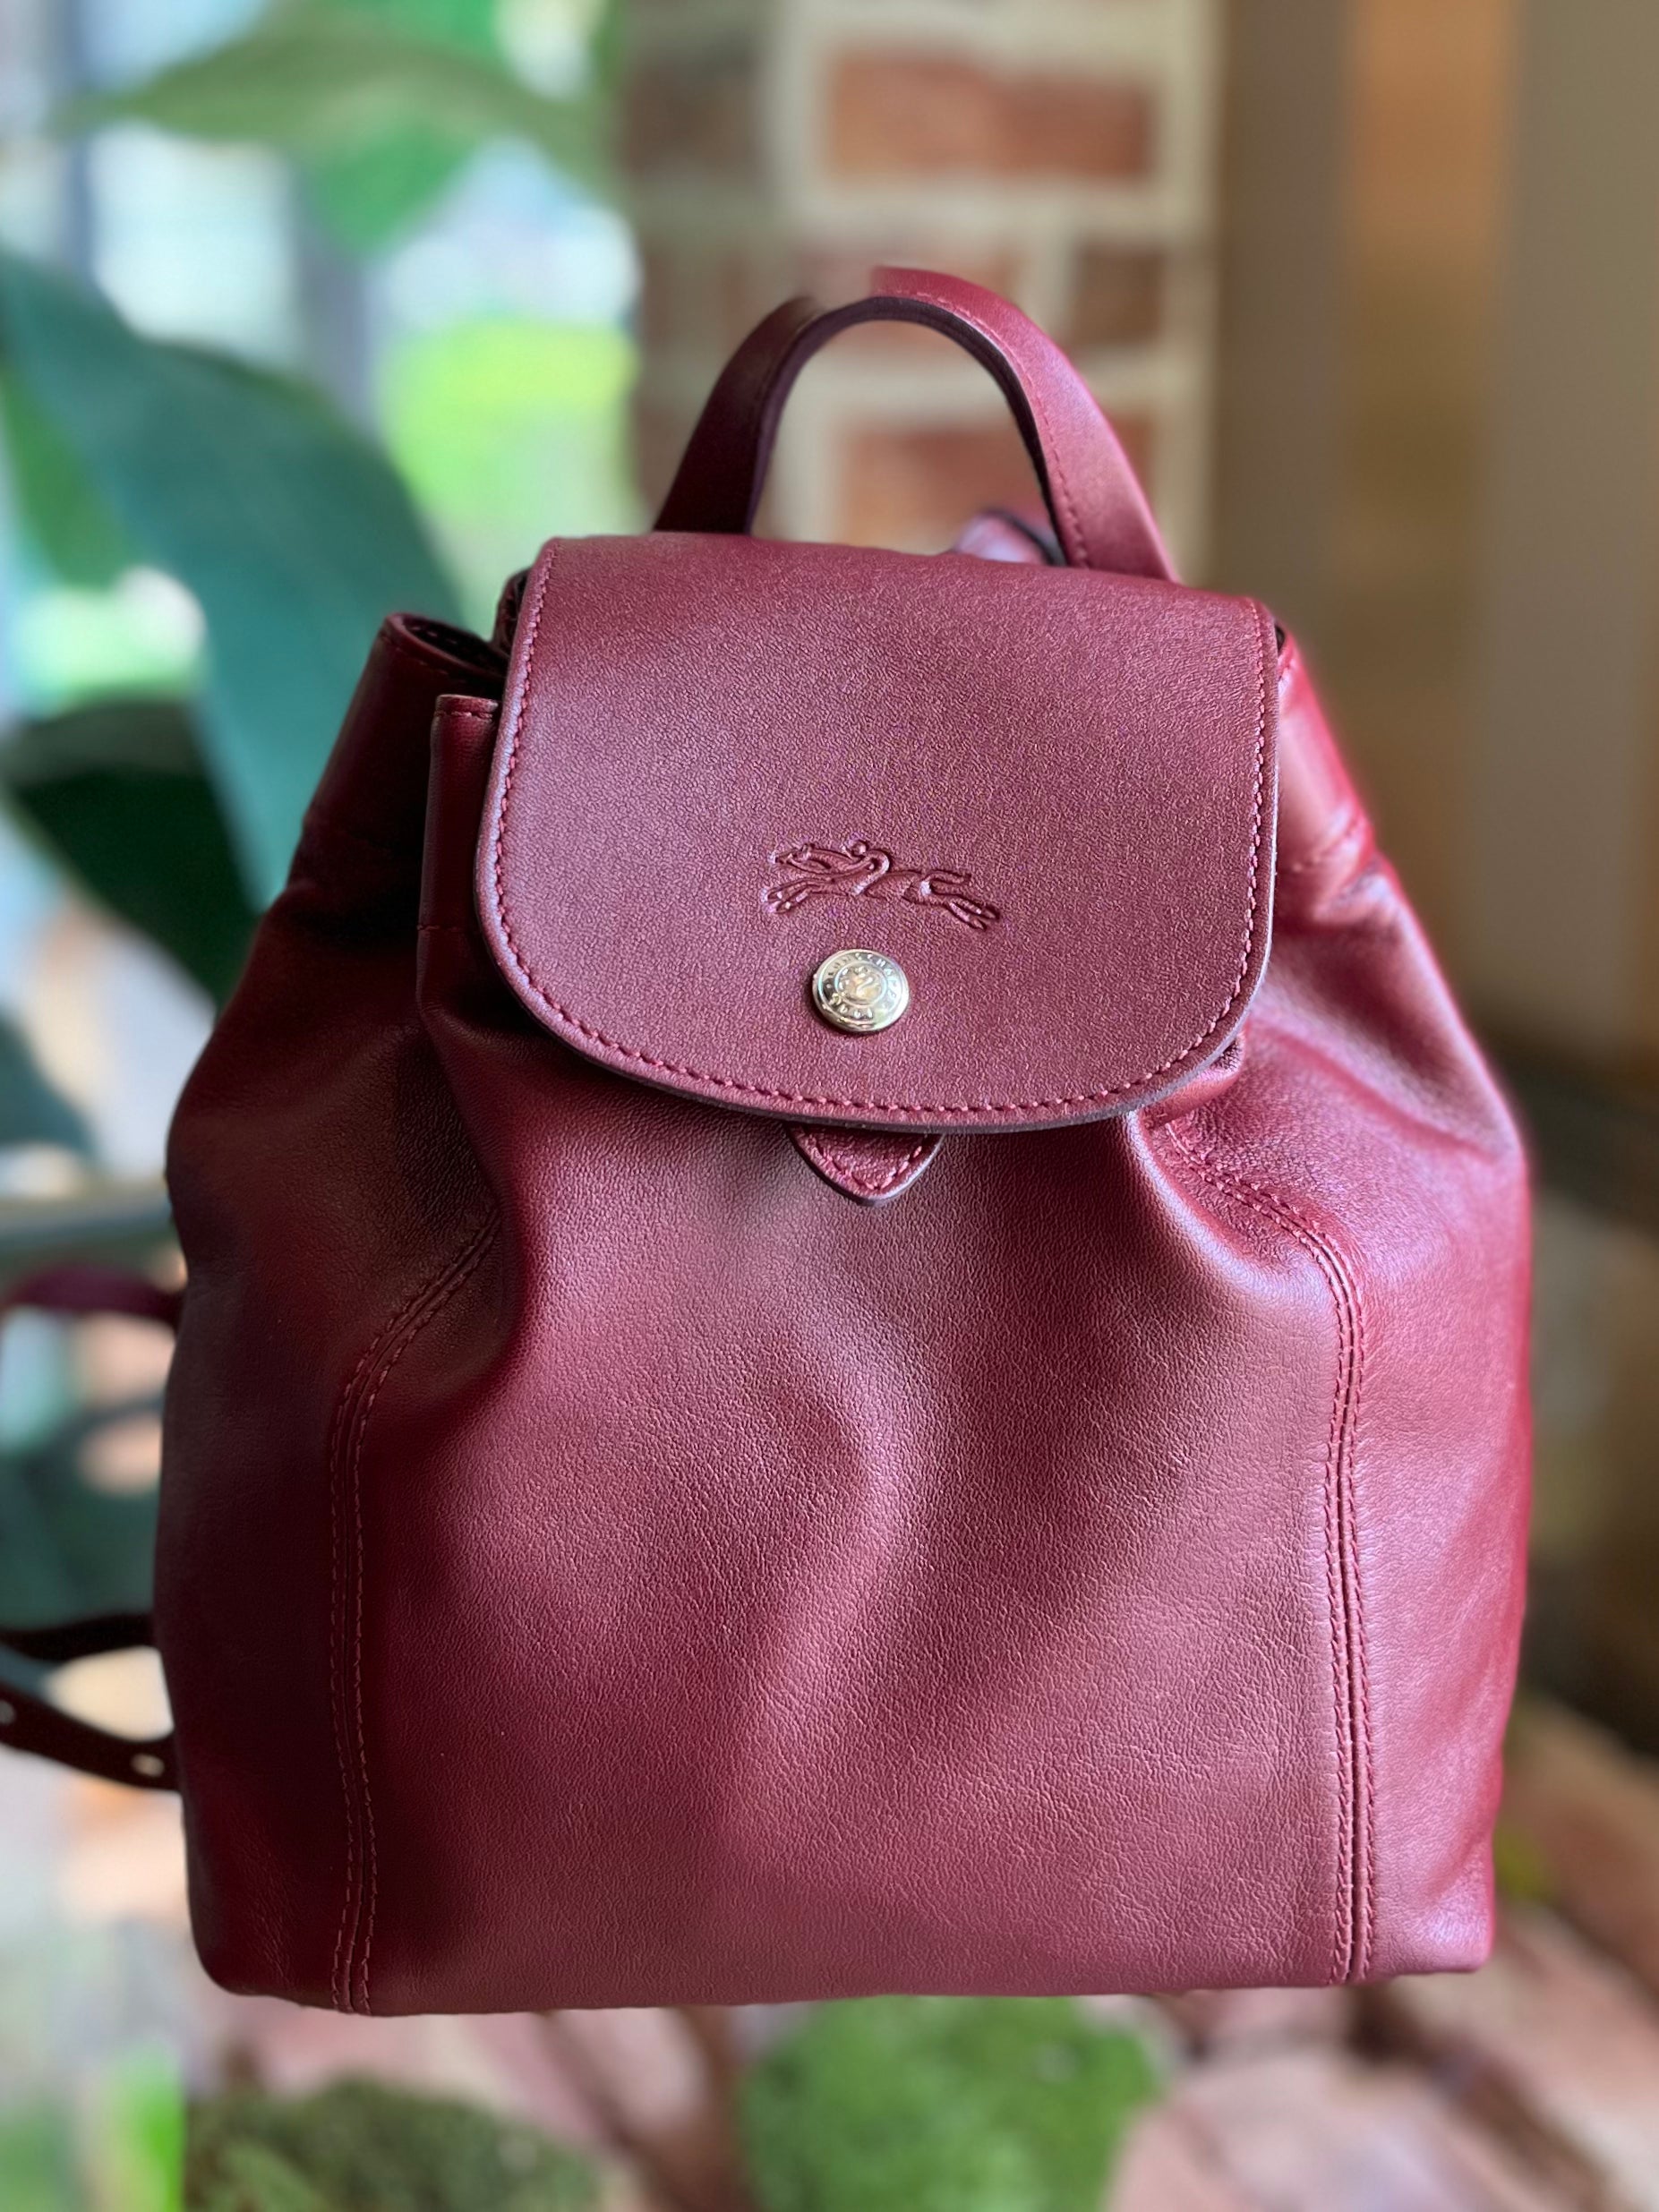 Longchamp 'Le Pliage' Backpack Review - Best Backpack